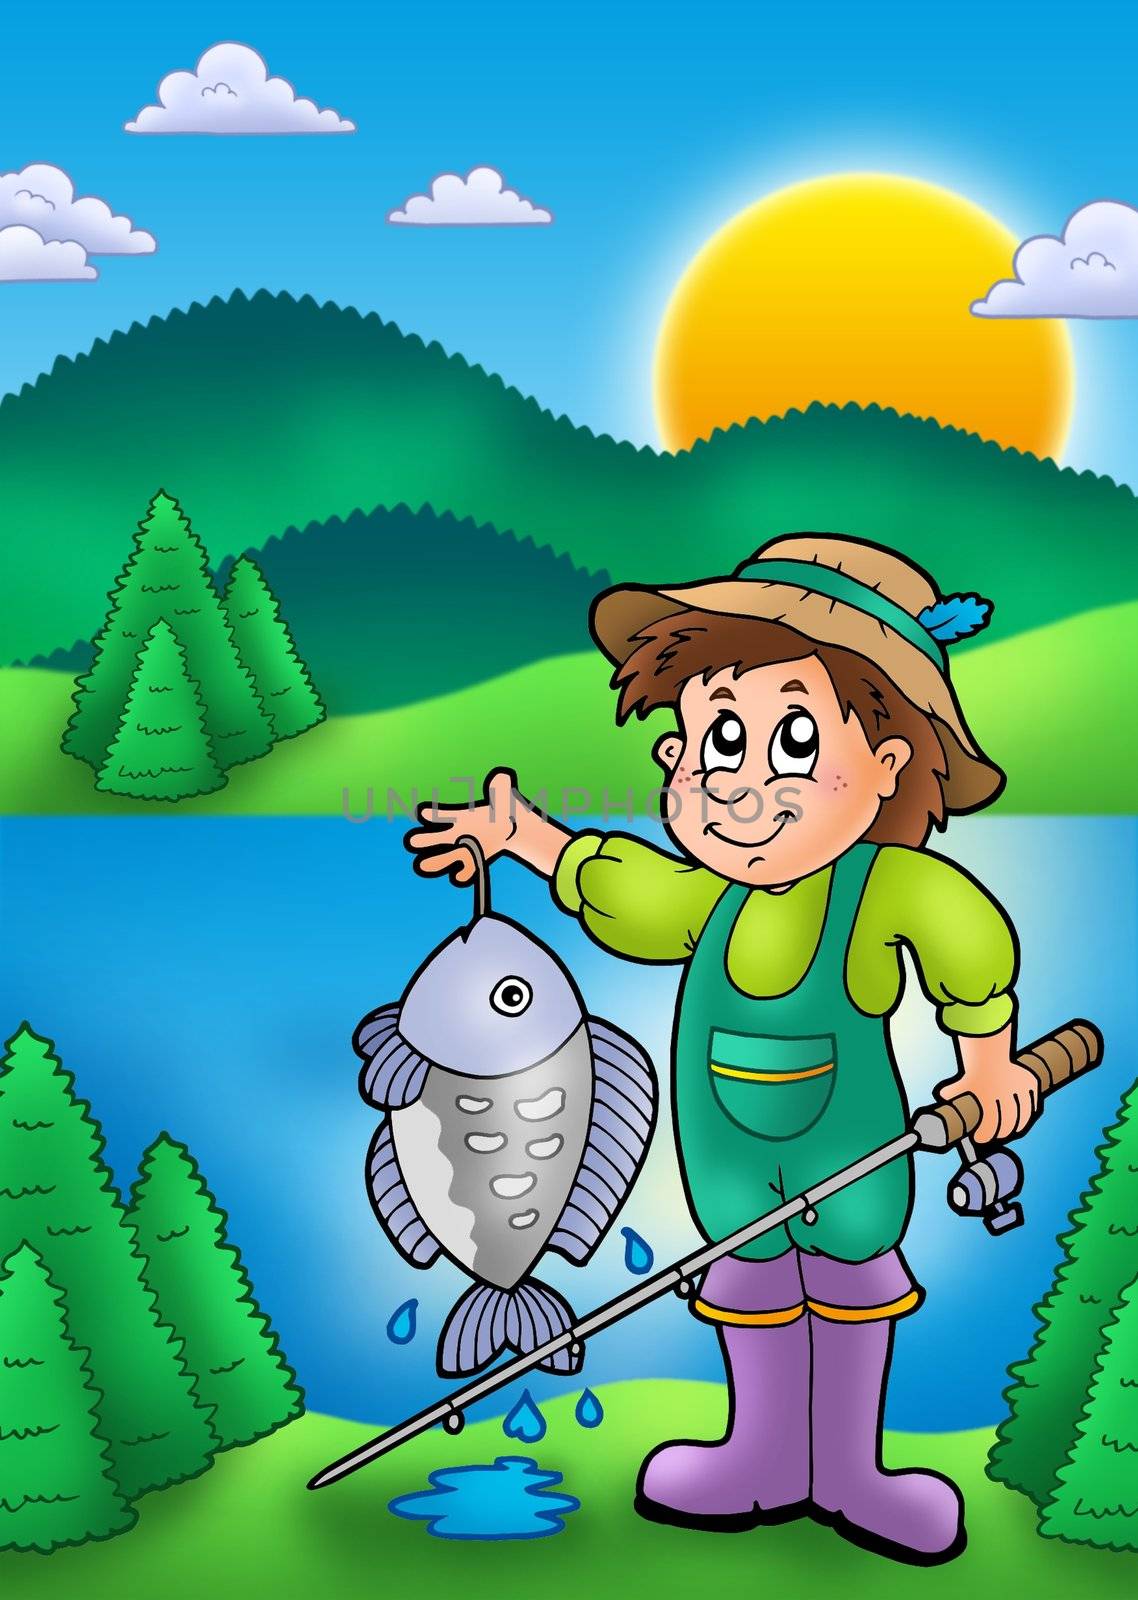 Small fisherman with fish - color illustration.